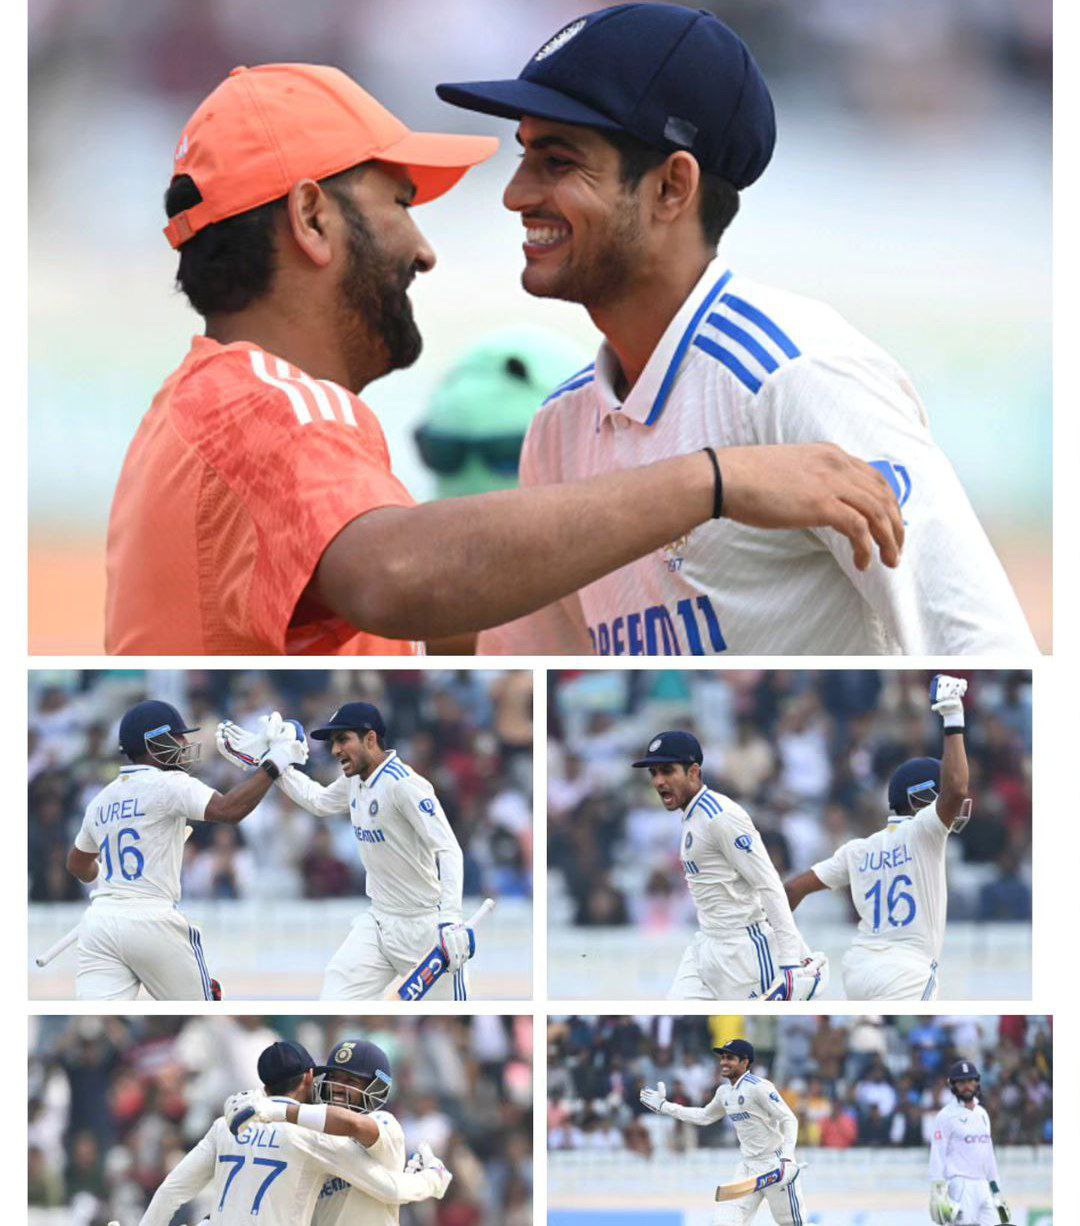 India vs England India defeated England and won the series|भारत बनाम इंग्लैंड| इंग्लैंड को हराकर सीरीज पर कब्जा कर लिया